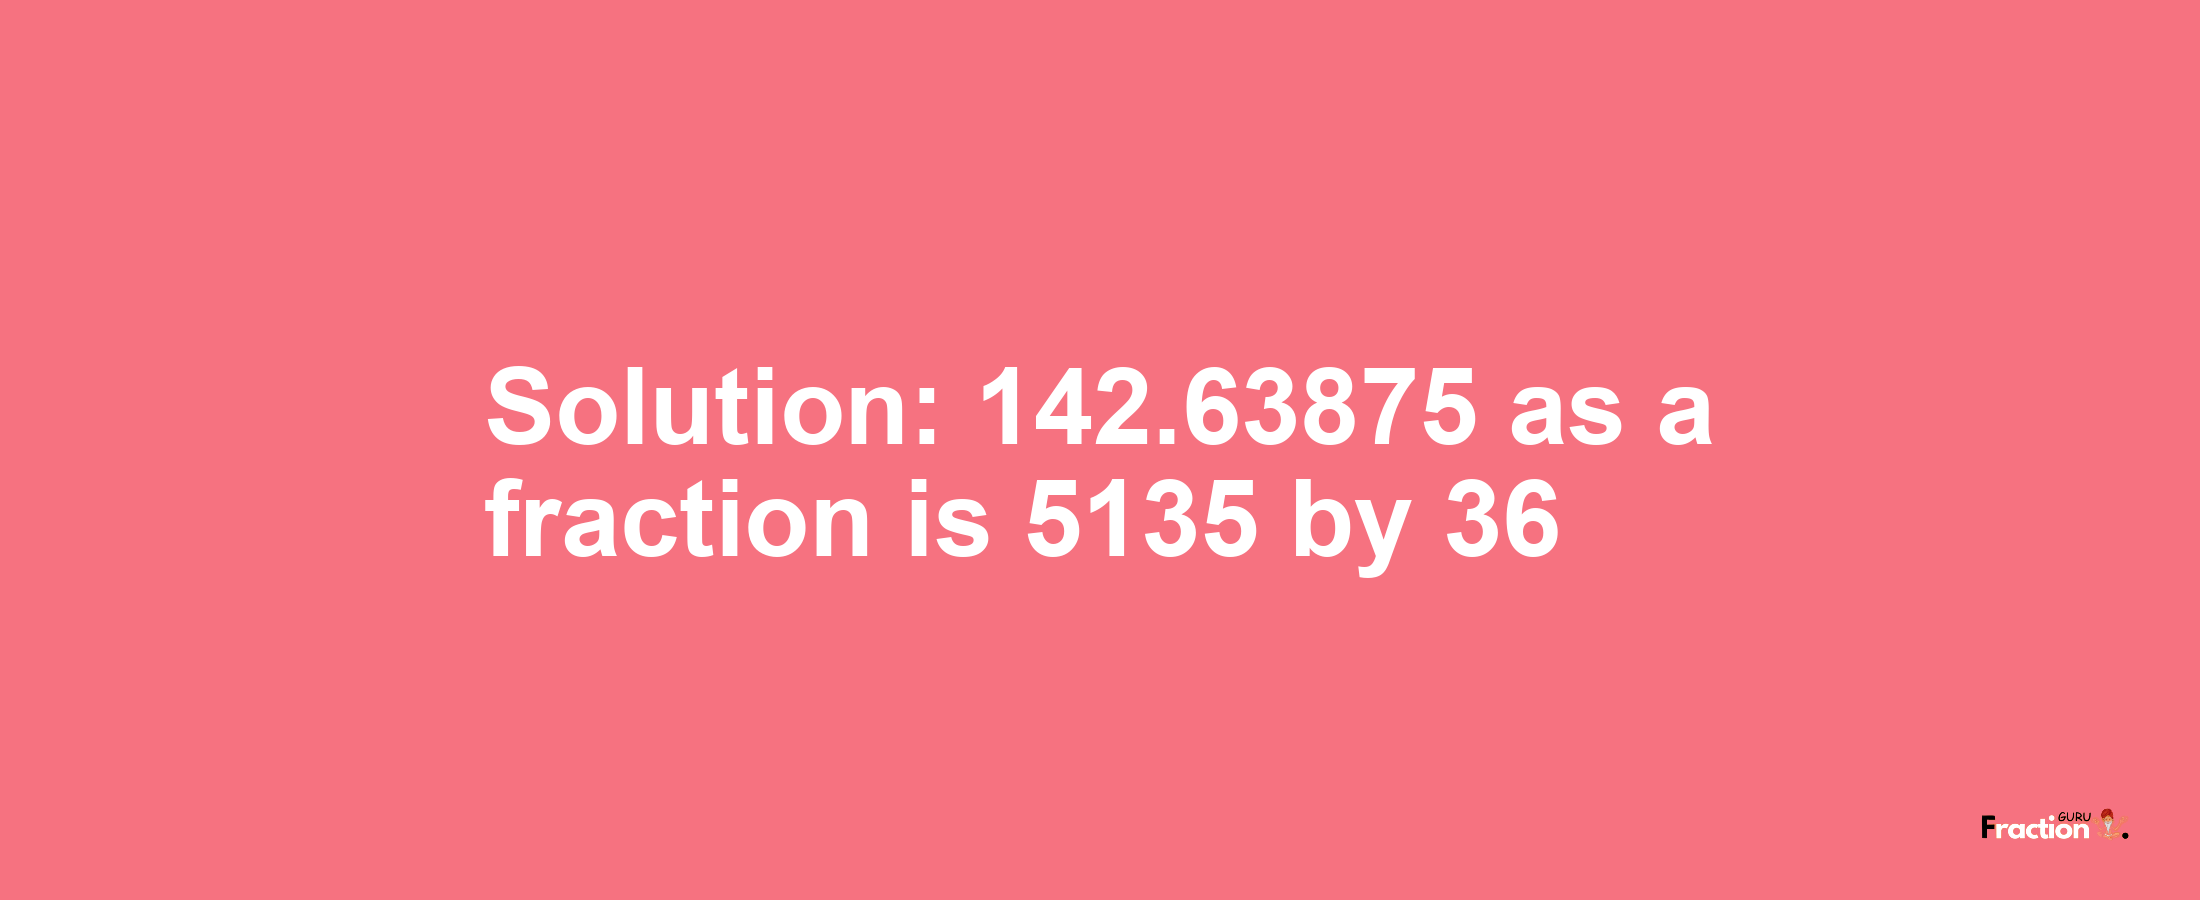 Solution:142.63875 as a fraction is 5135/36